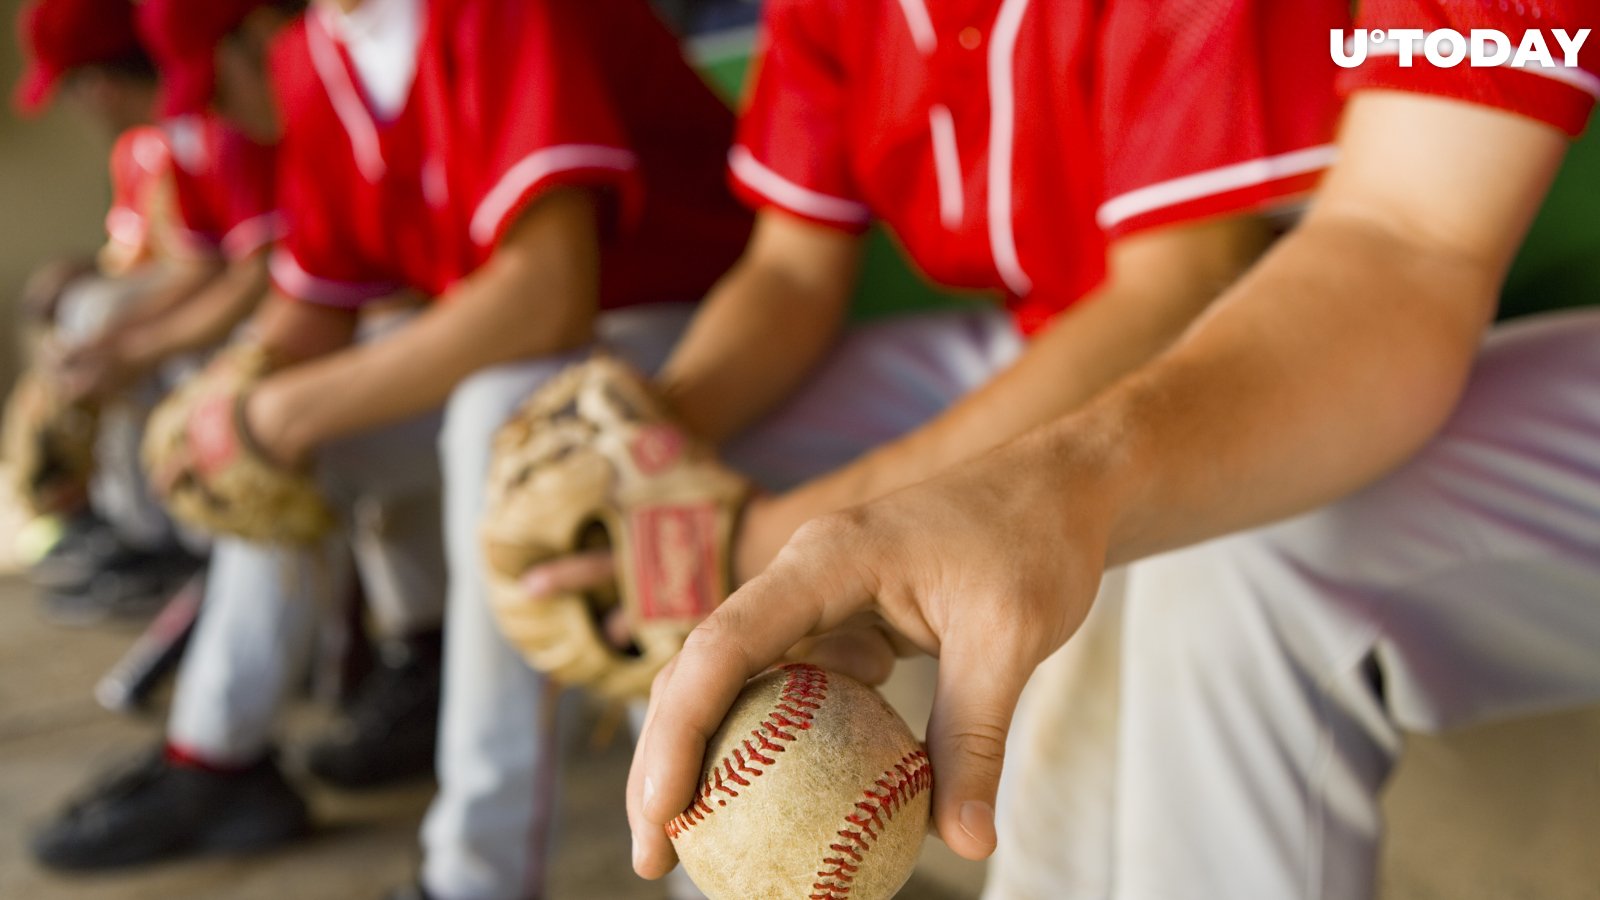 This Baseball Team Now Pays Players in Bitcoin